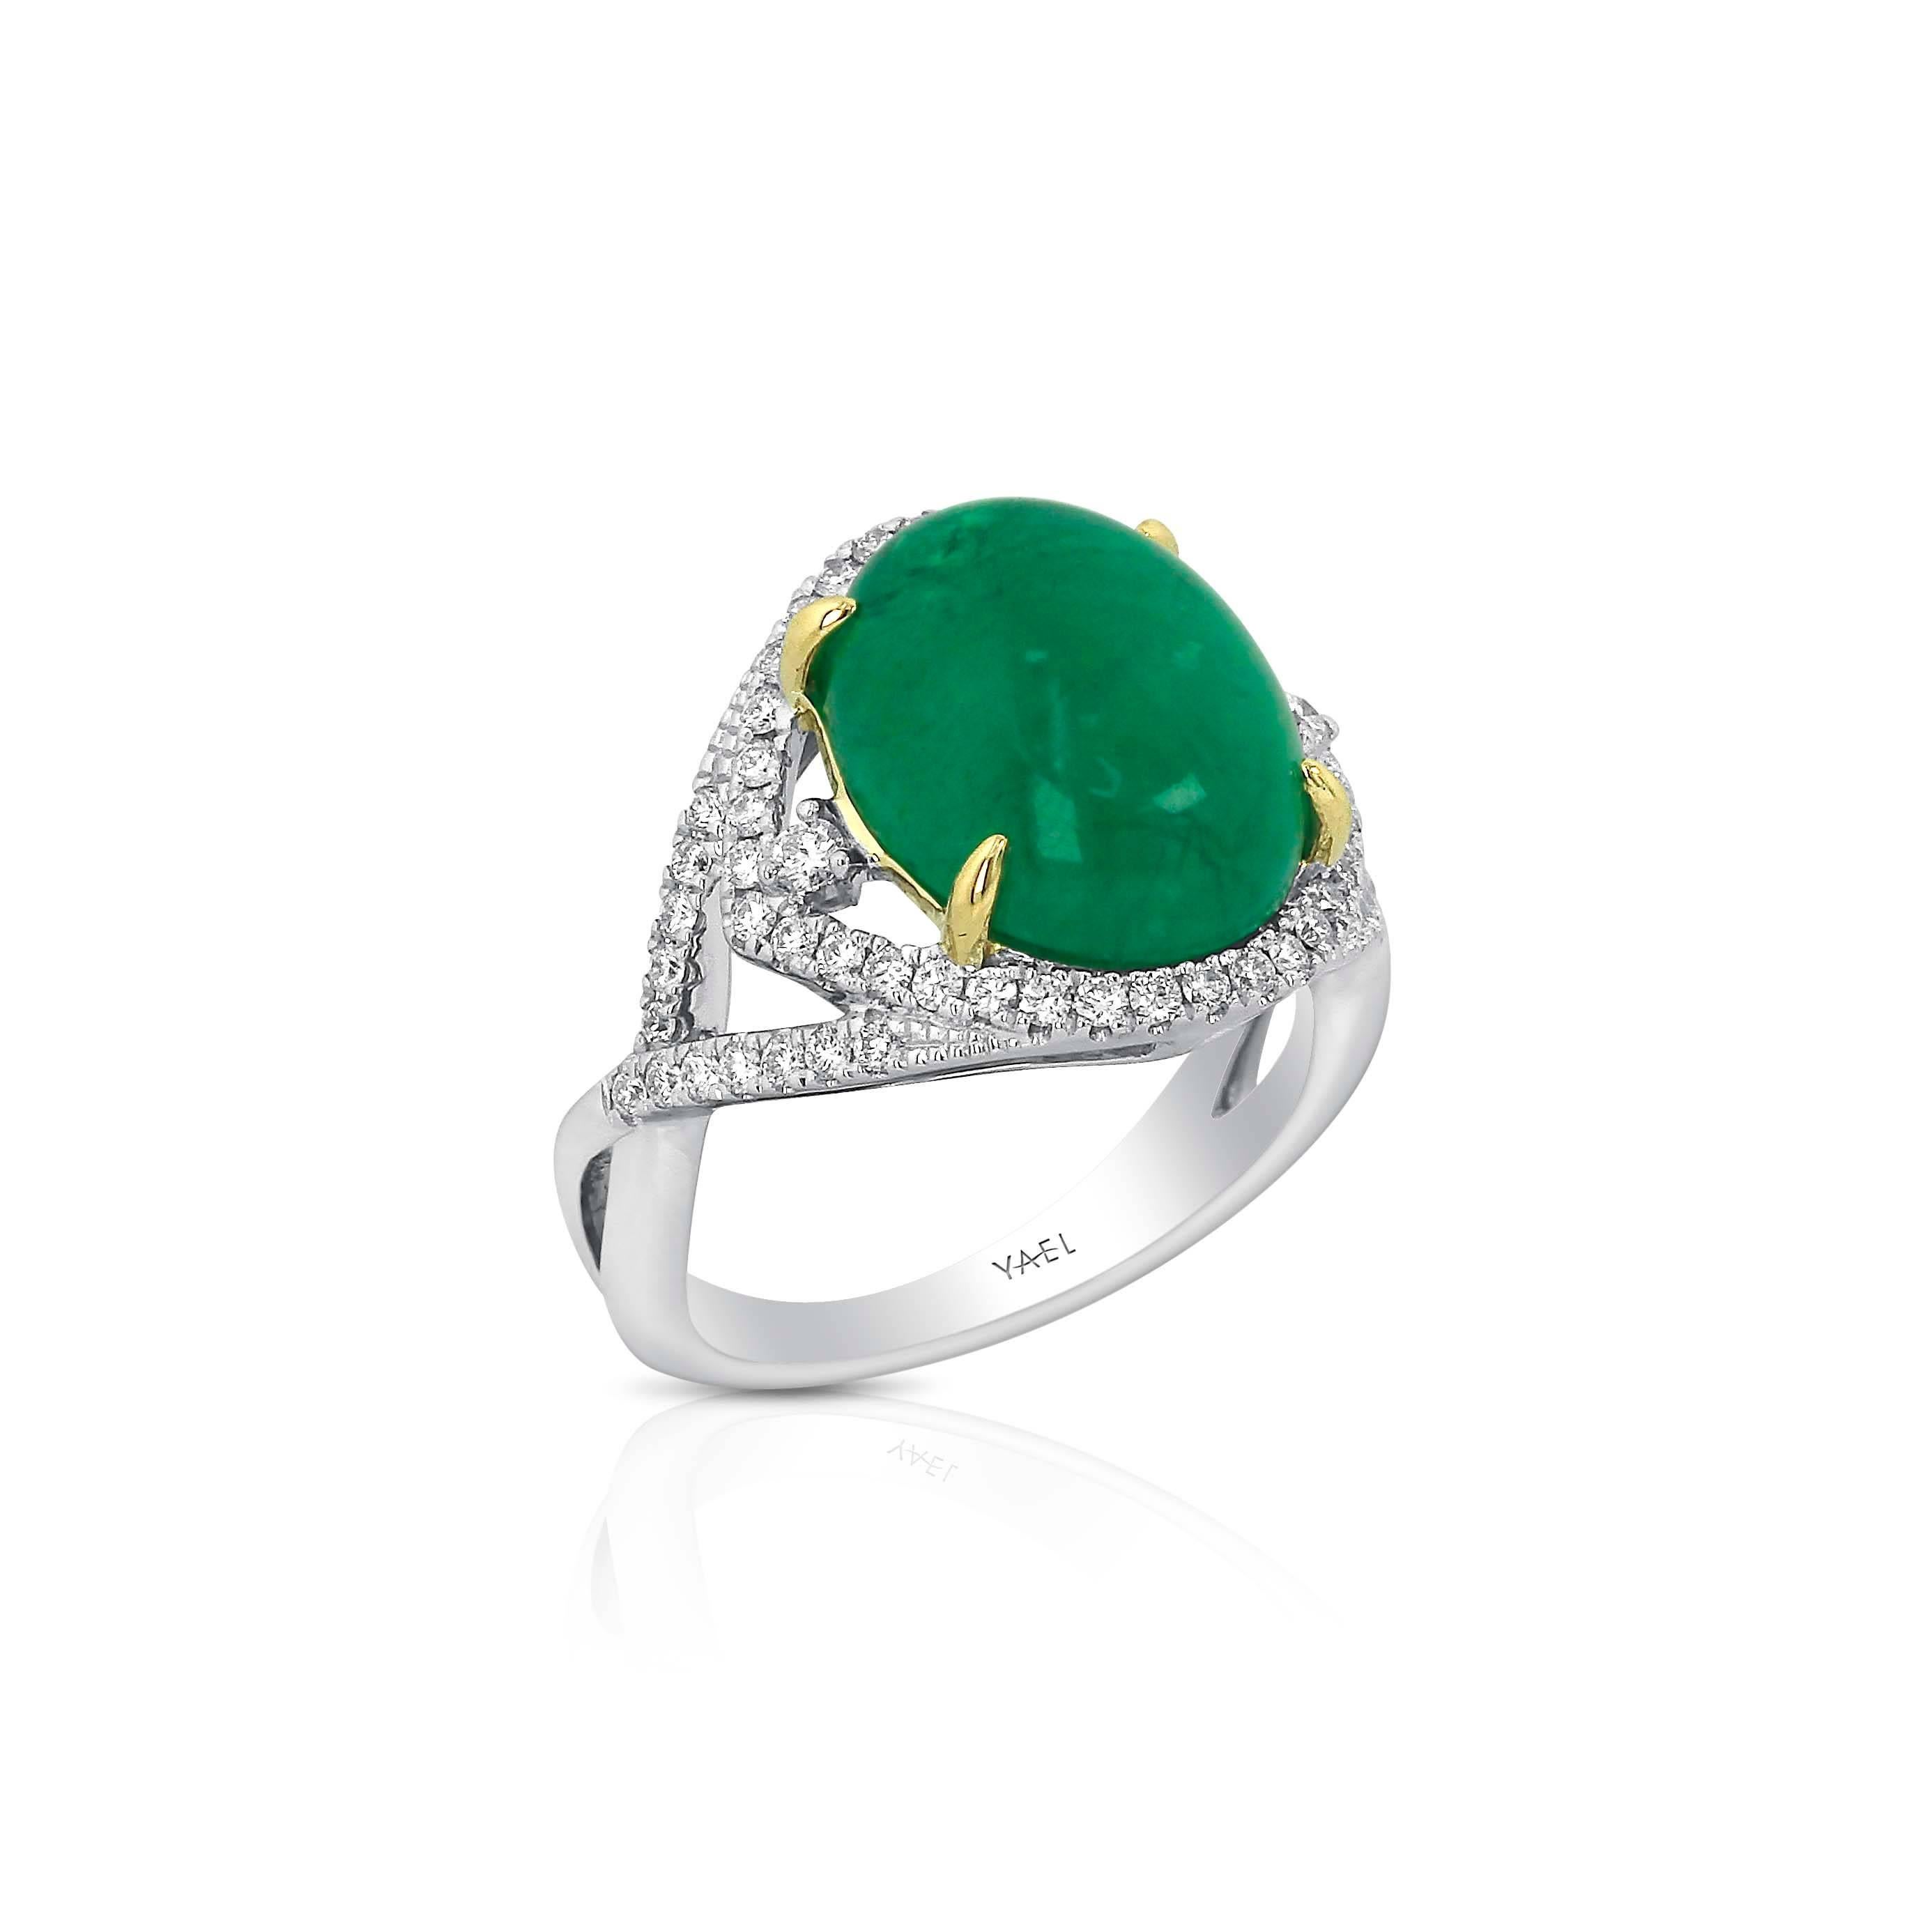 Yael Designs created a ring featuring a 7.19 carat oval cabochon emerald accented with approximately 0.50 carats of brilliant white round diamonds set in two toned (white and yellow) gold. 
